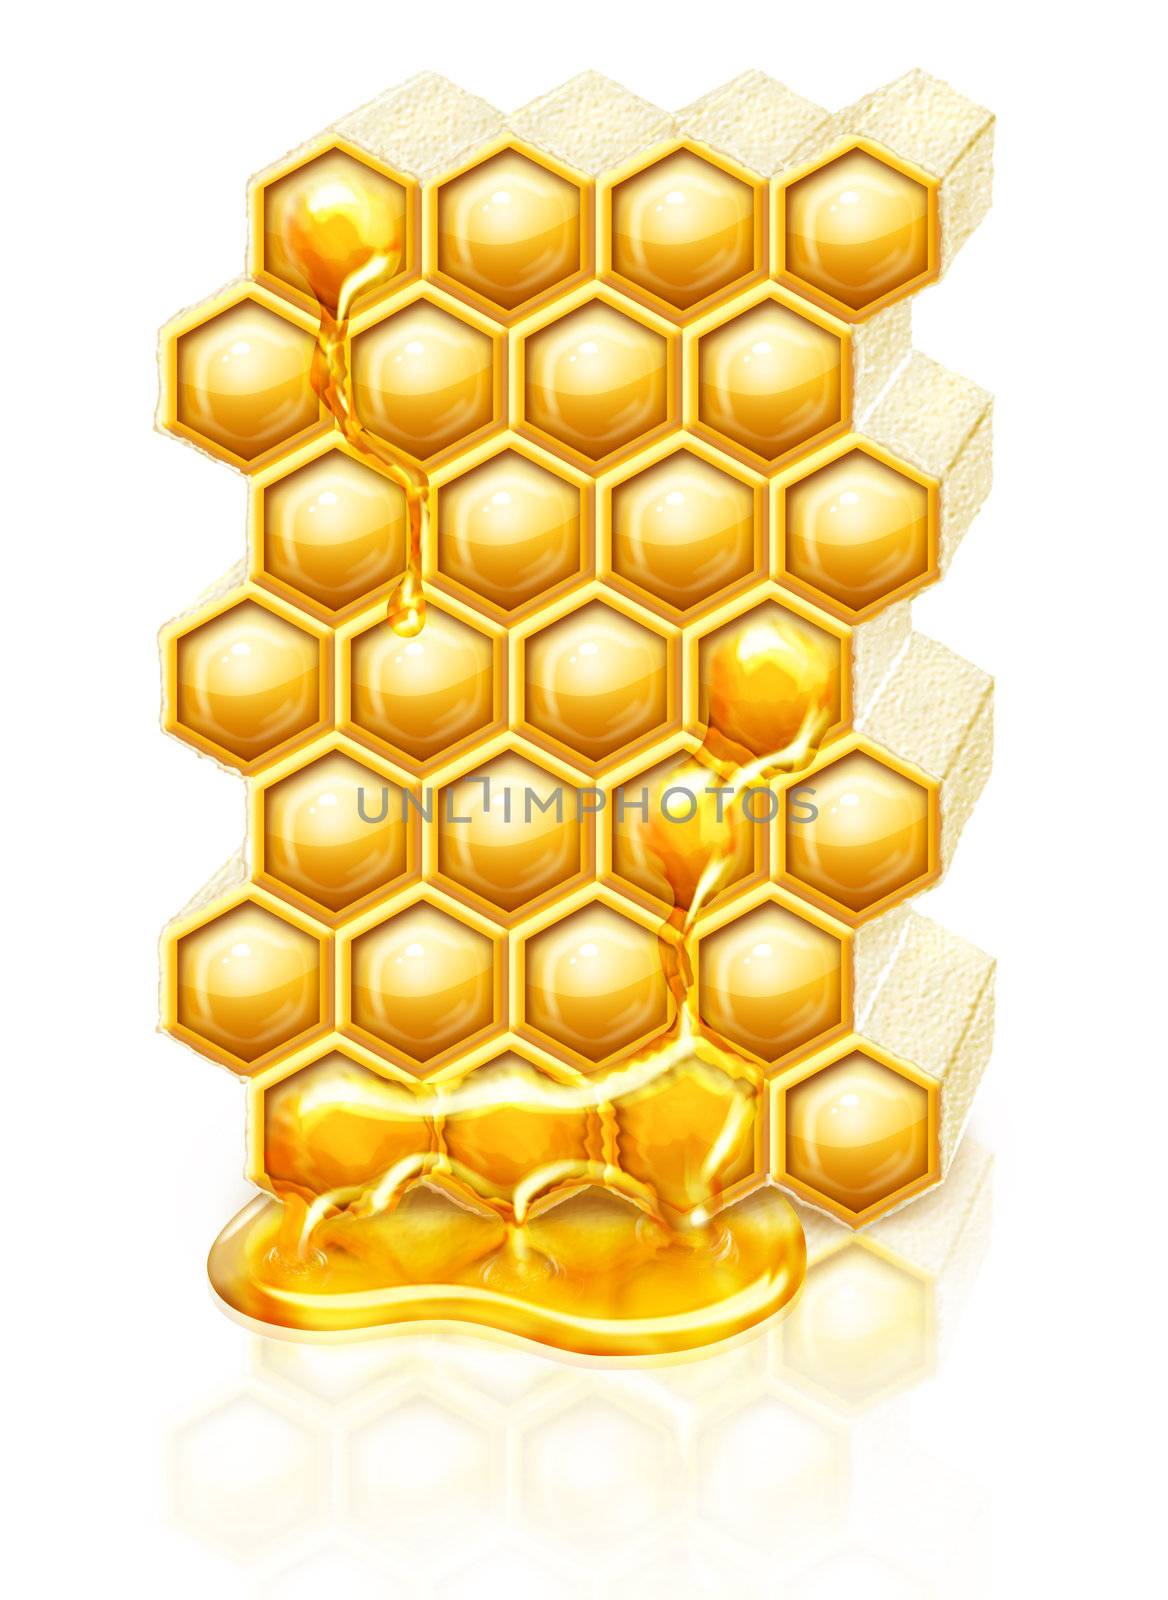 Bee honeycombs with honey flowing down